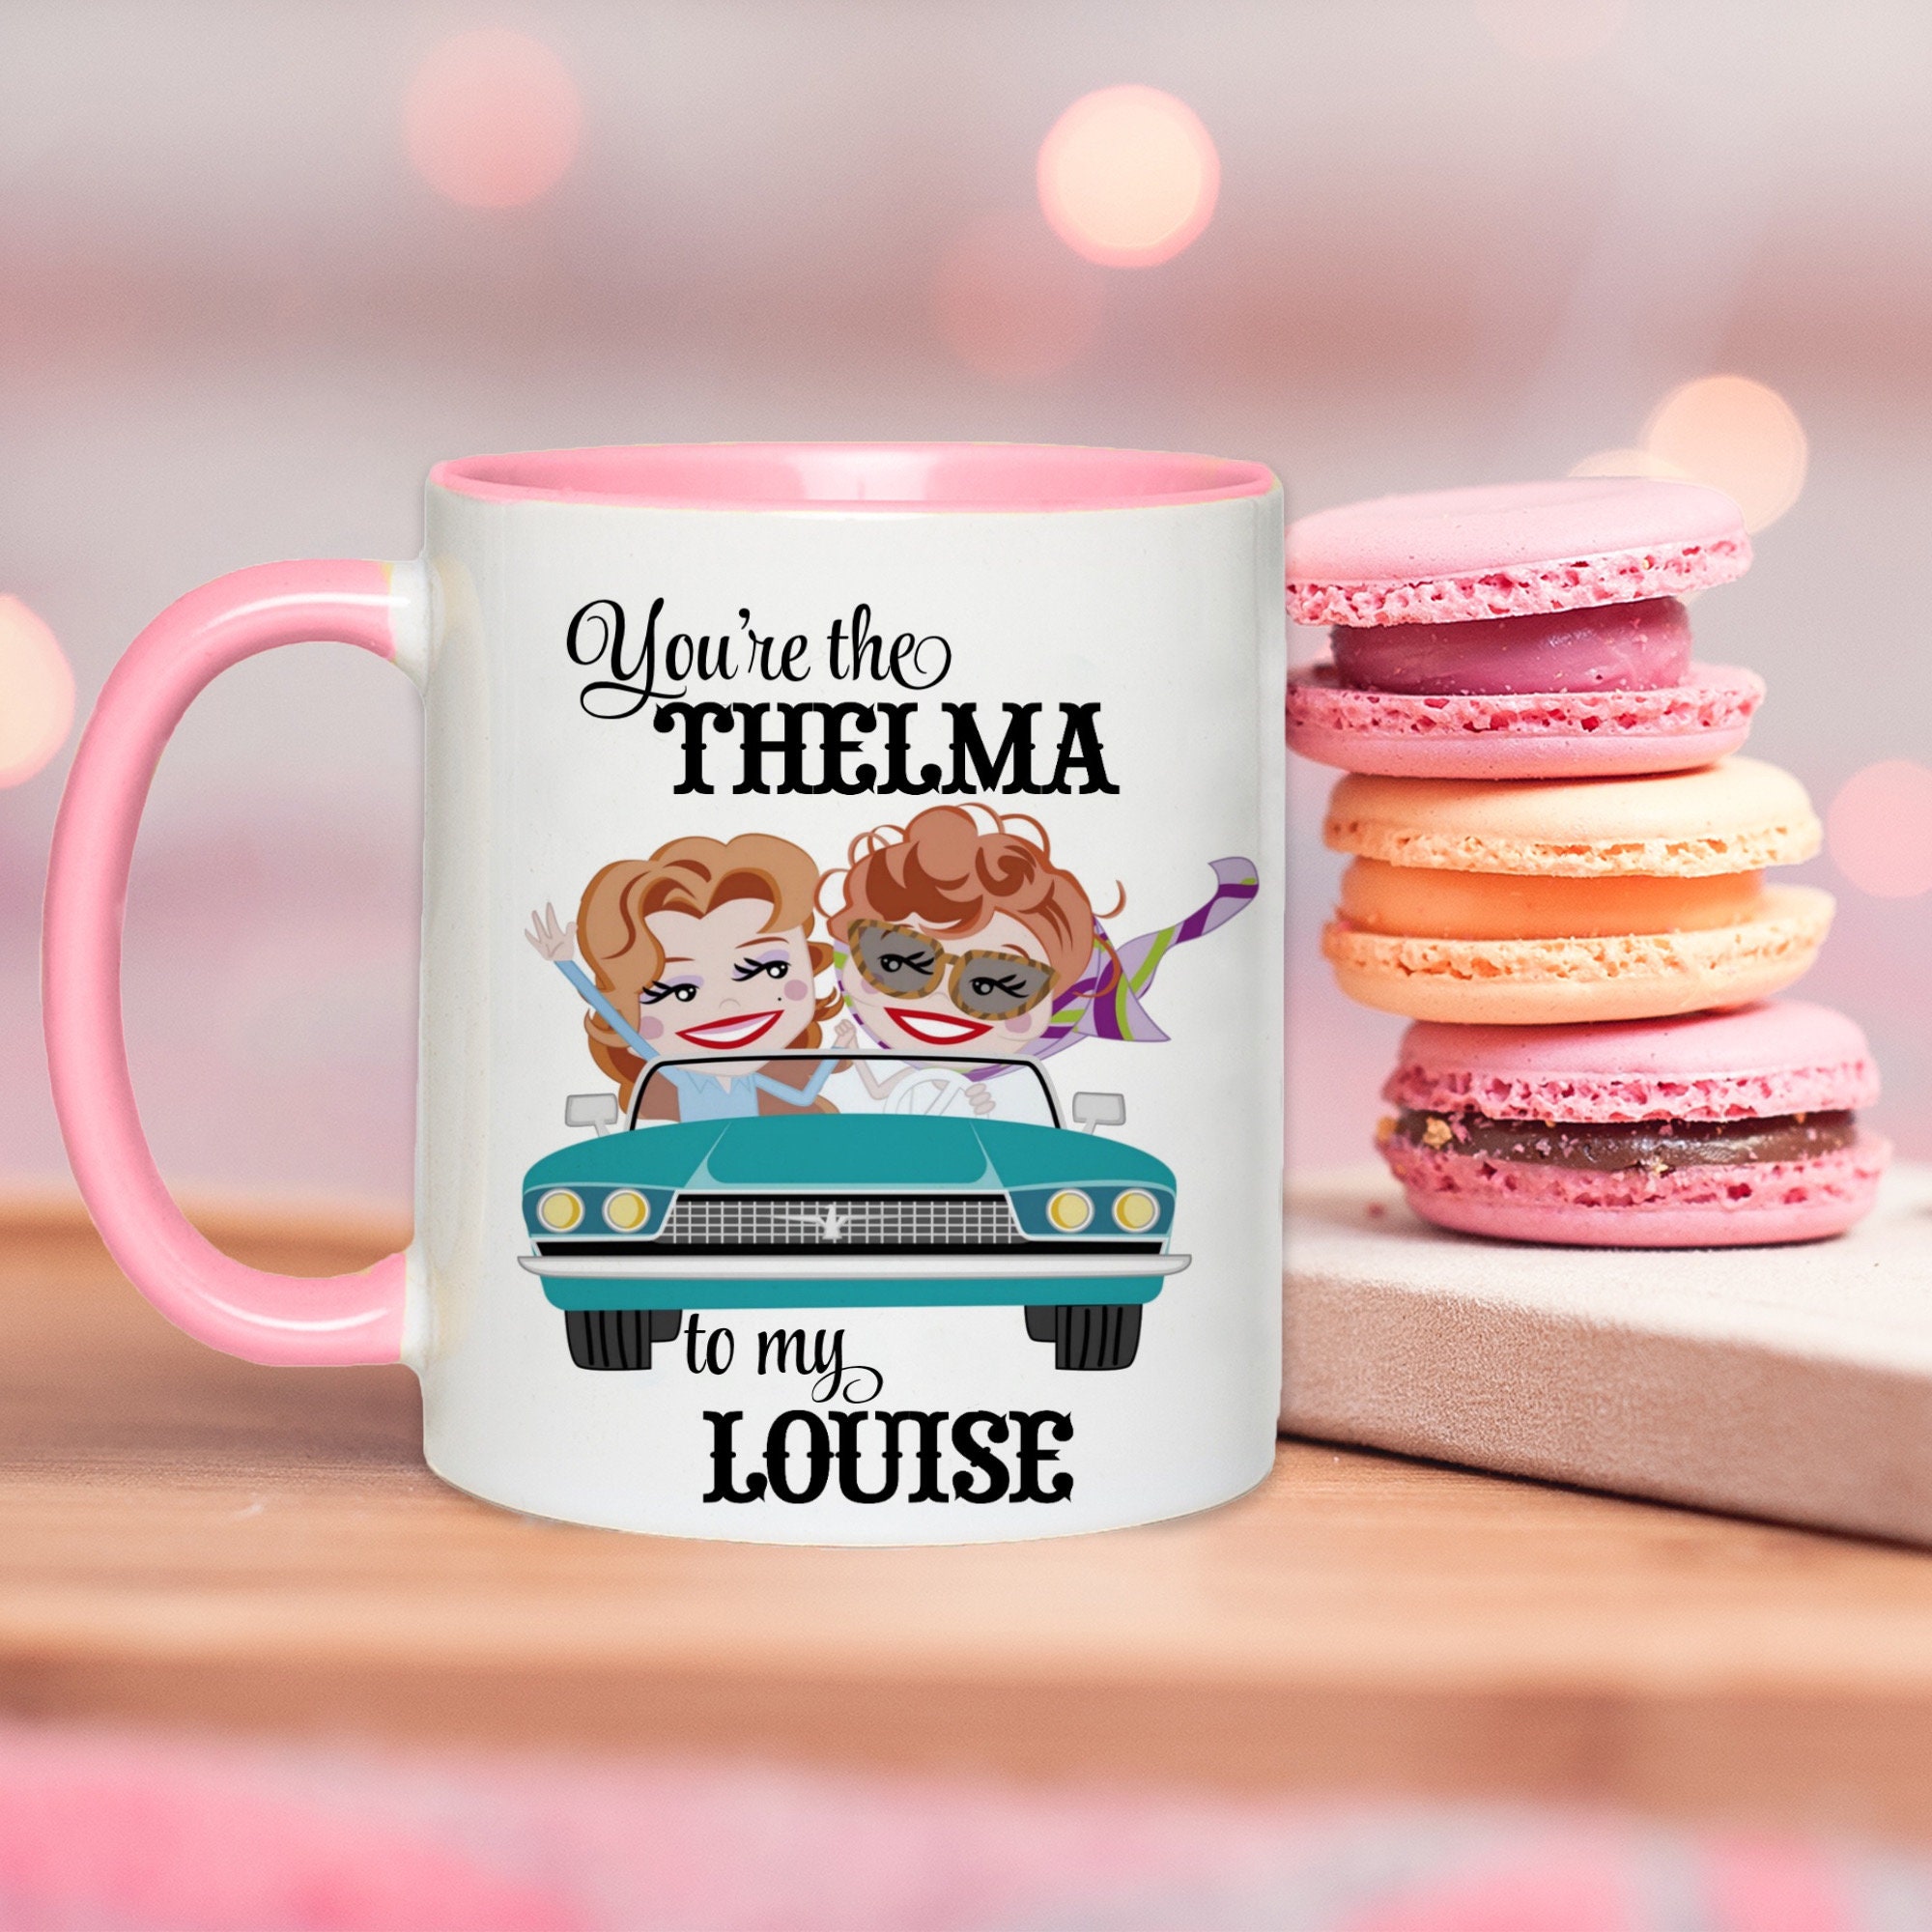 You be Thelma. I'll be Louise. Keychain by anne taintor 